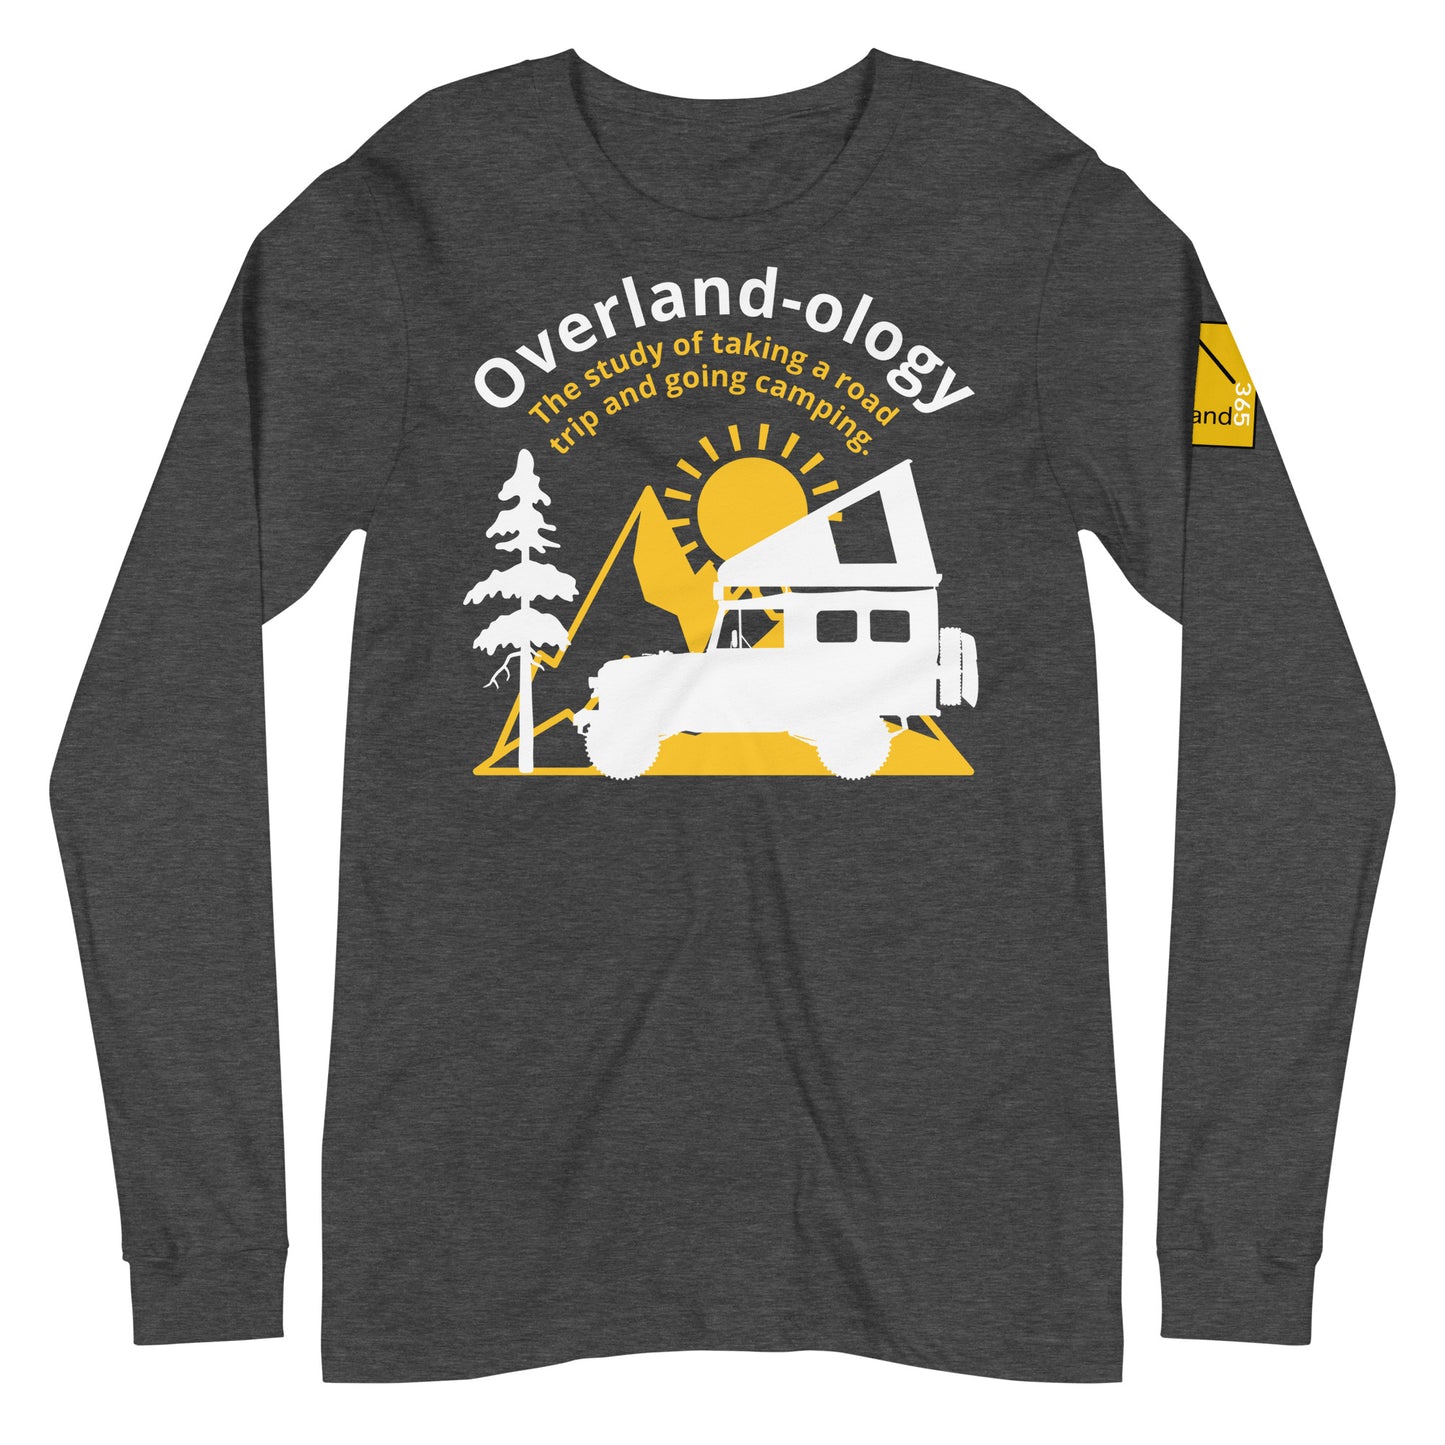 Overland-ology - The study of taking a road trip and going camping. Dark Grey long-sleeve. overland365.com